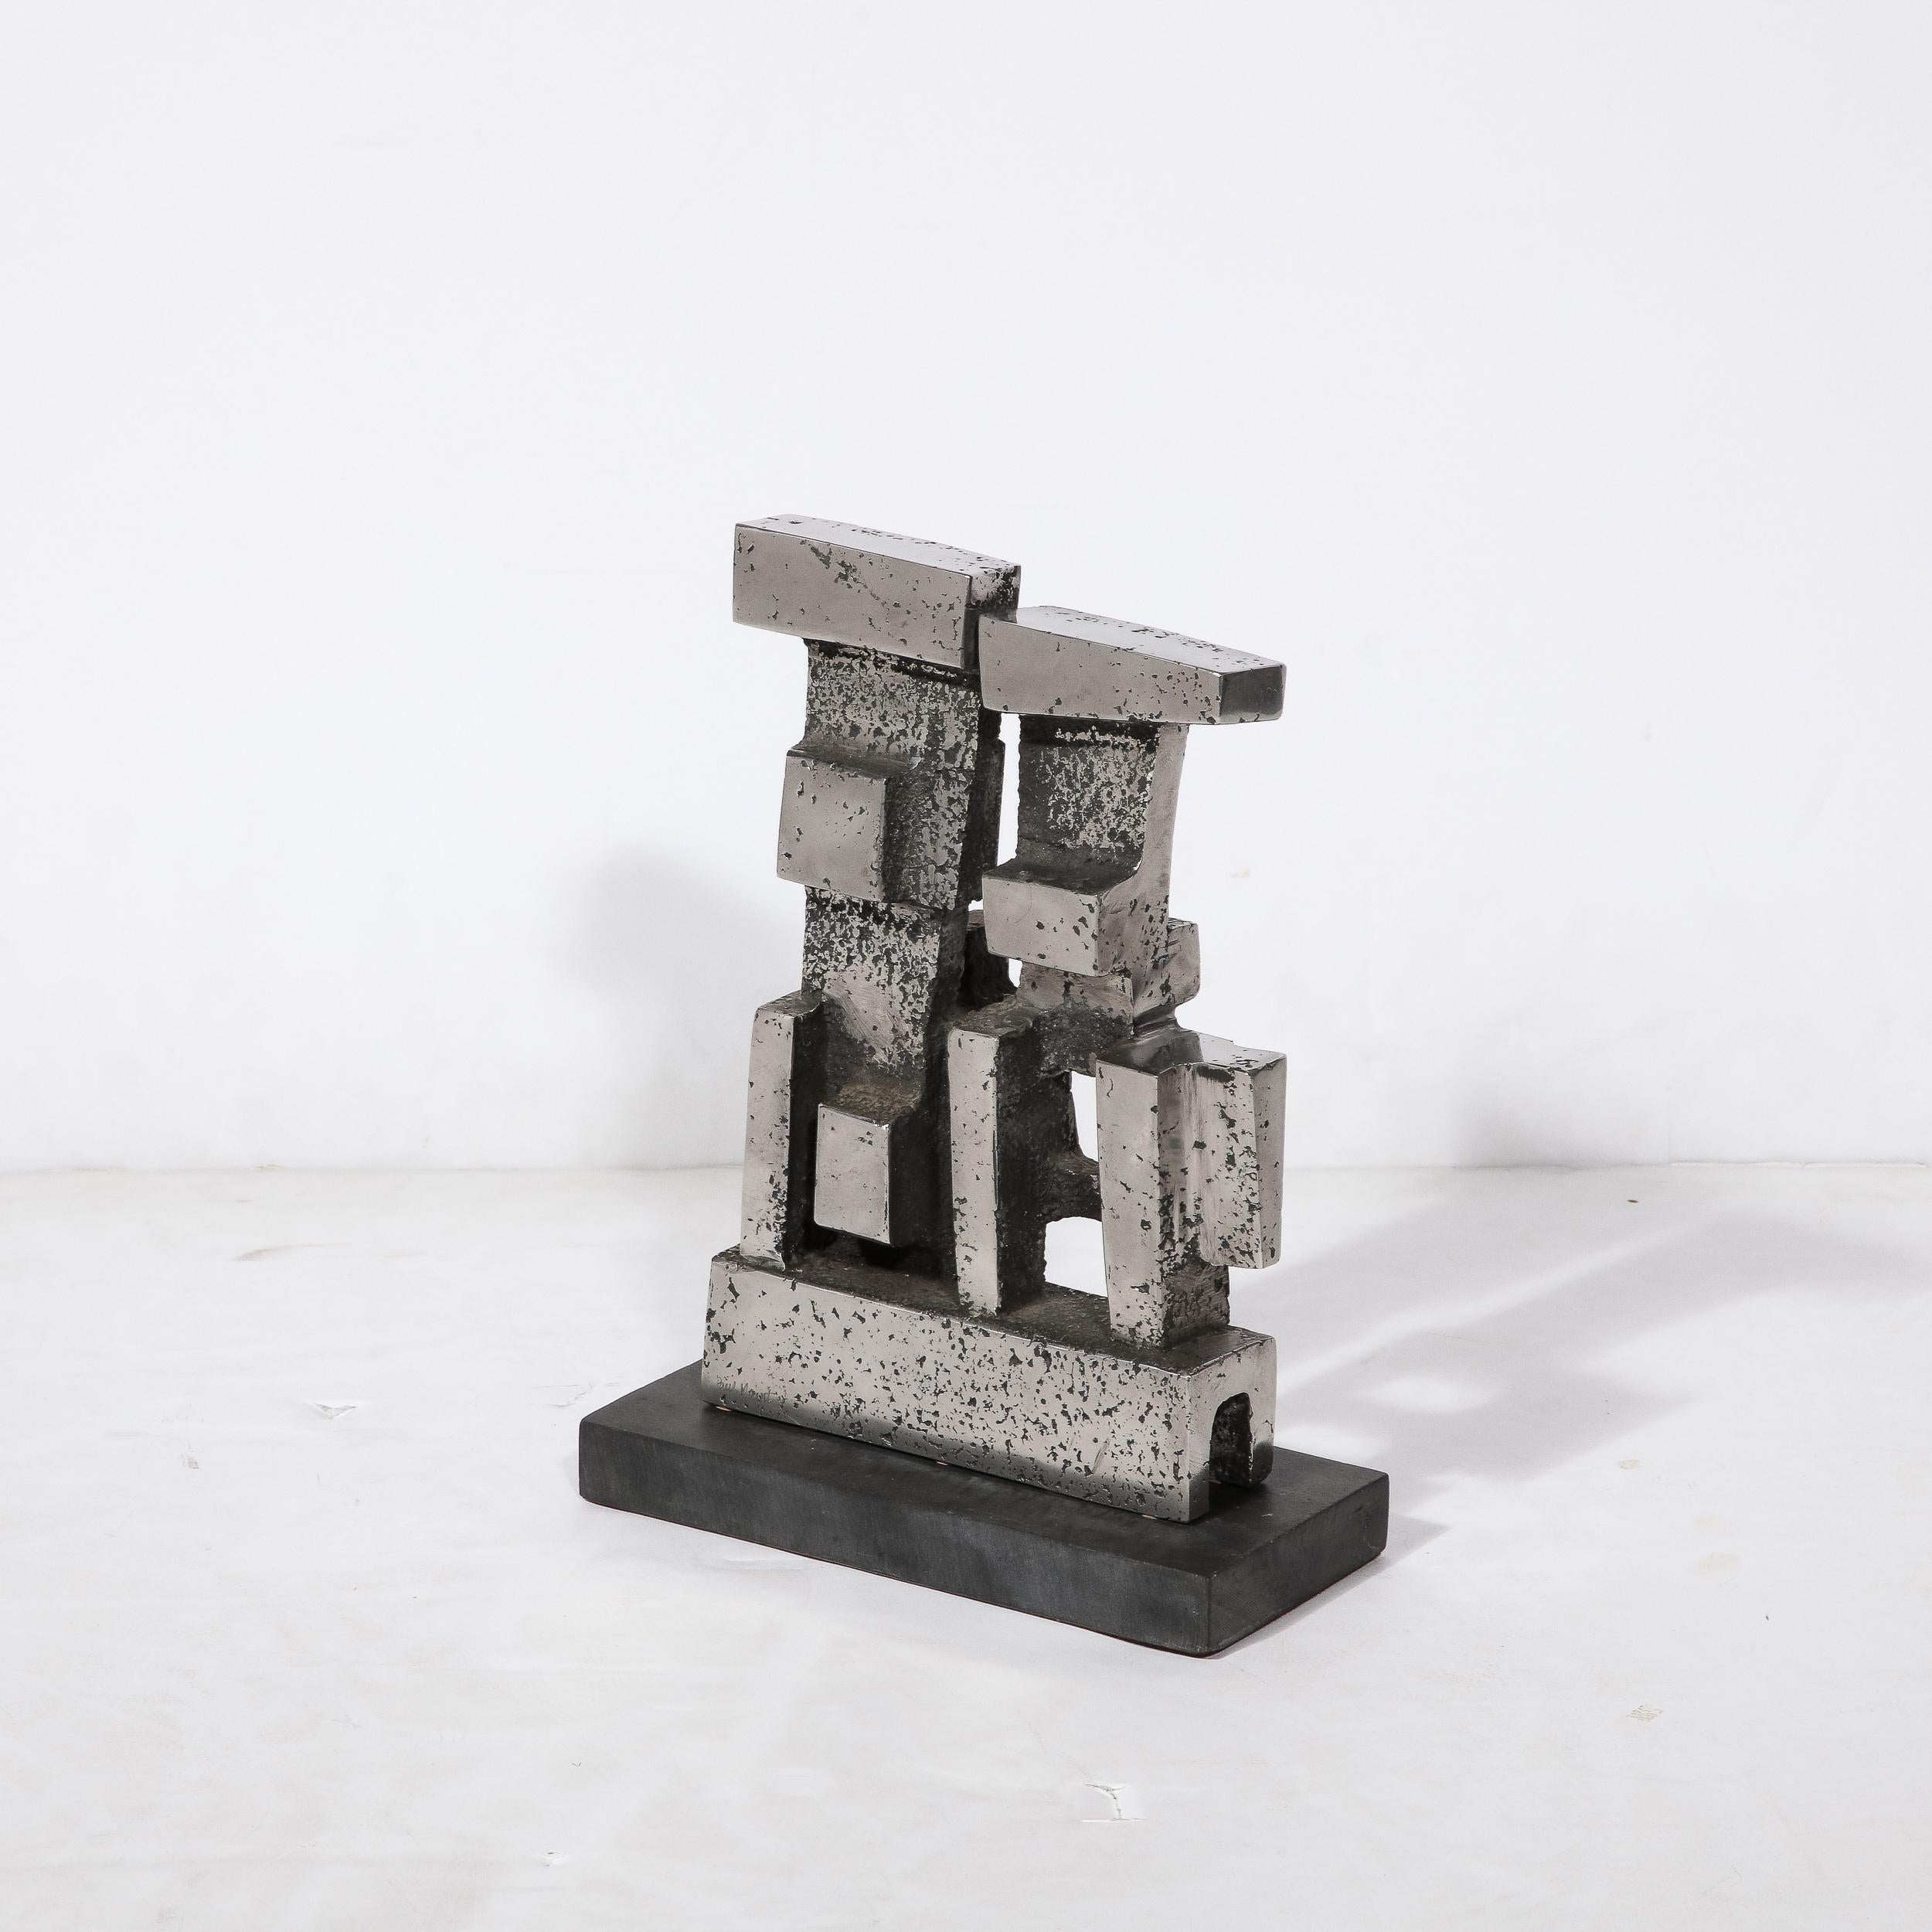 English Brutalist Modernist Geometric Sculpture in Caste Stainless Signed Paul Mount  For Sale